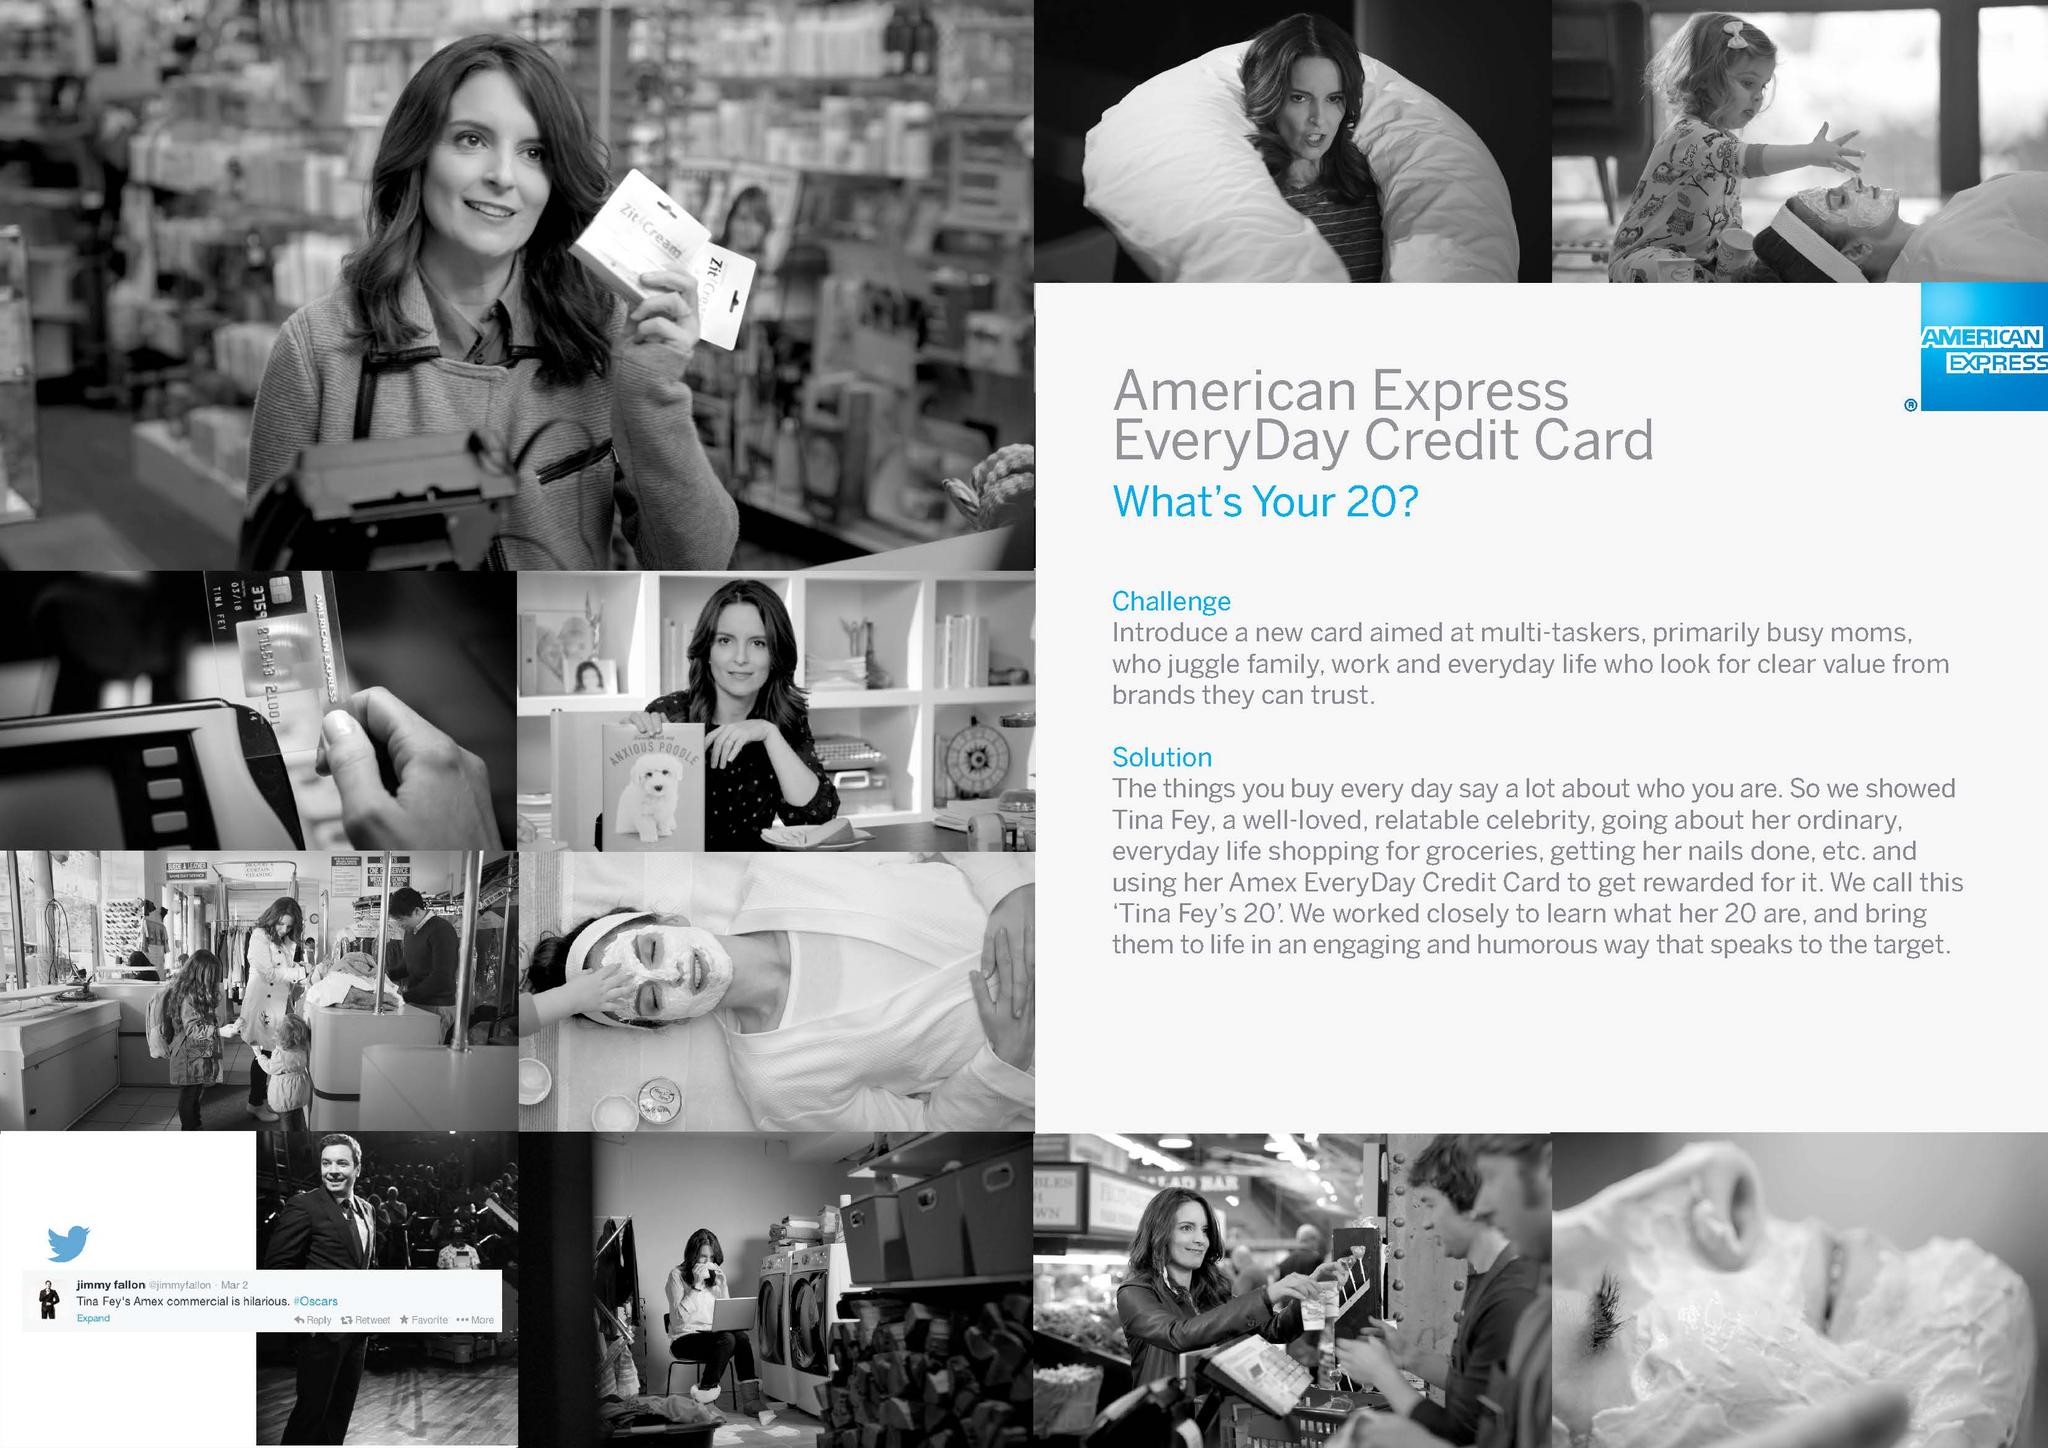 AMEX EVERYDAY CREDIT CARD LAUNCH